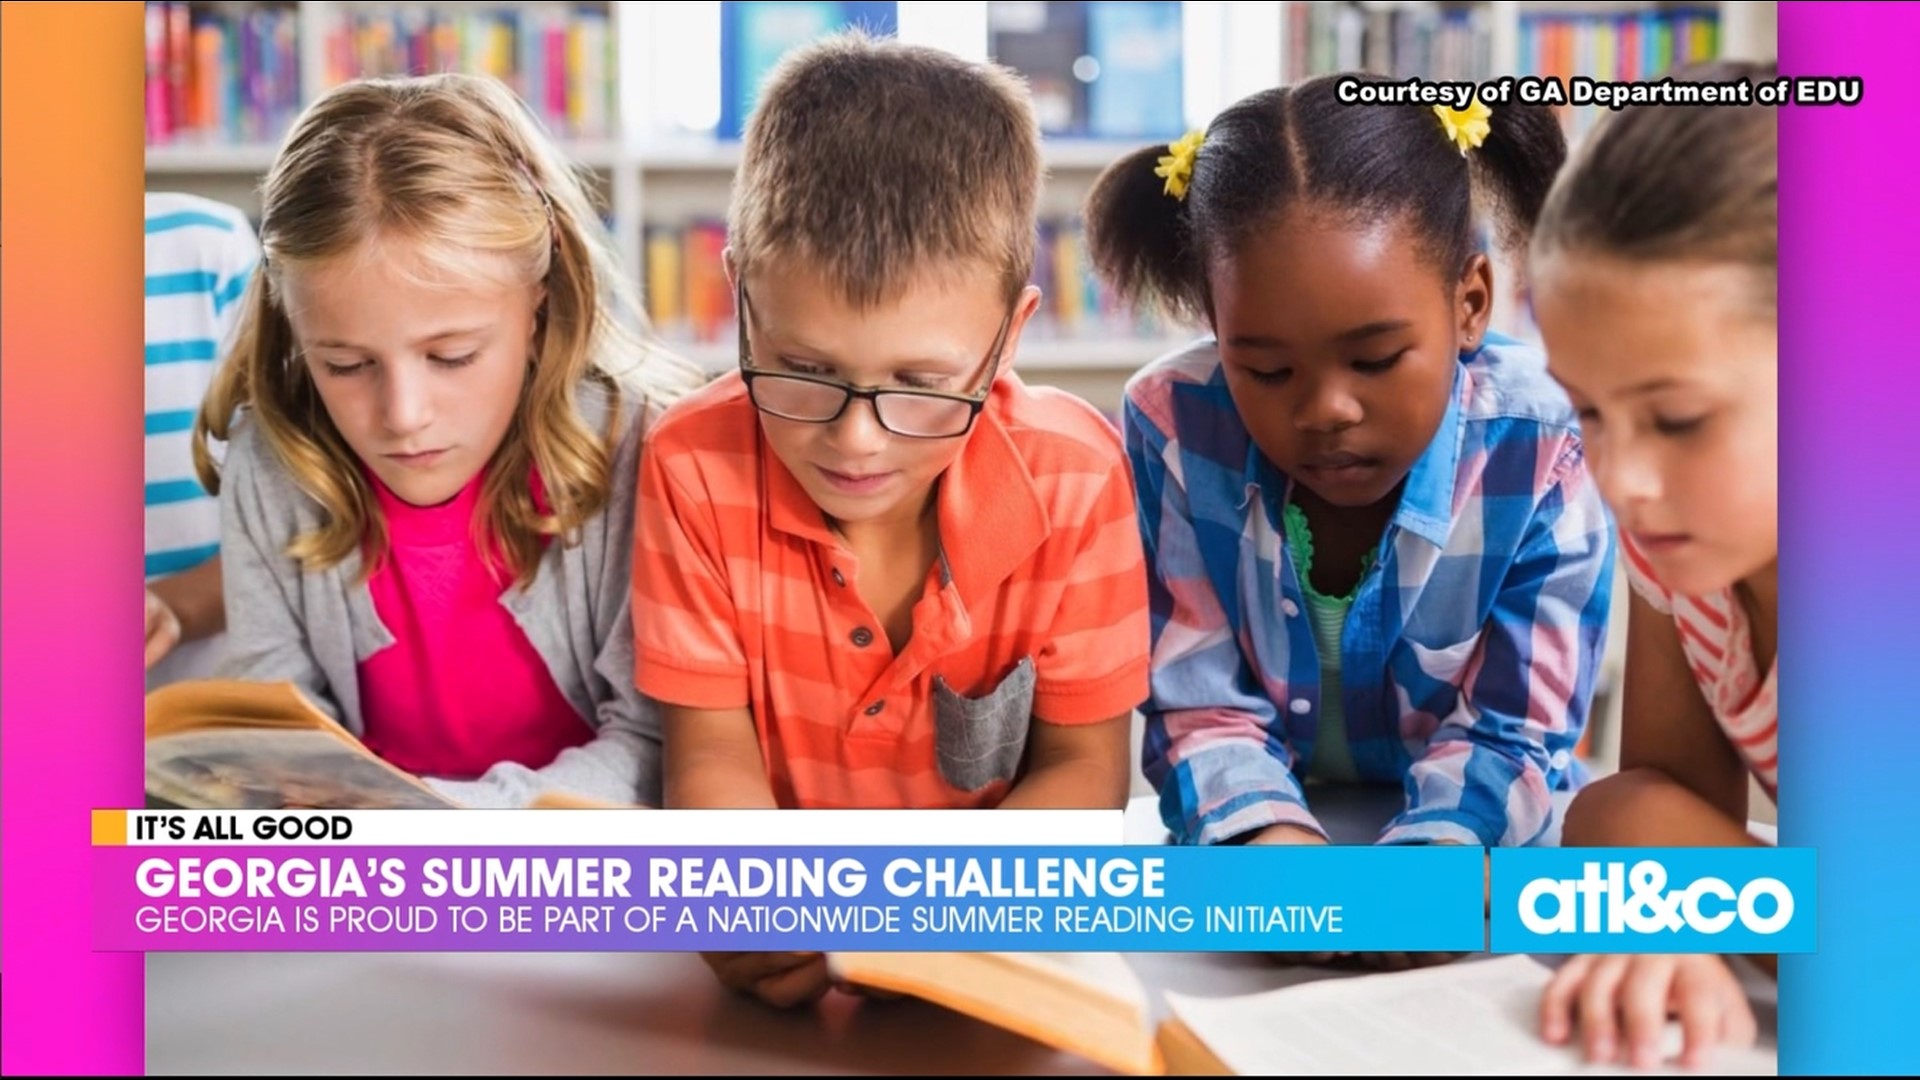 The Peach State is proud to be part of a nationwide summer reading initiative.